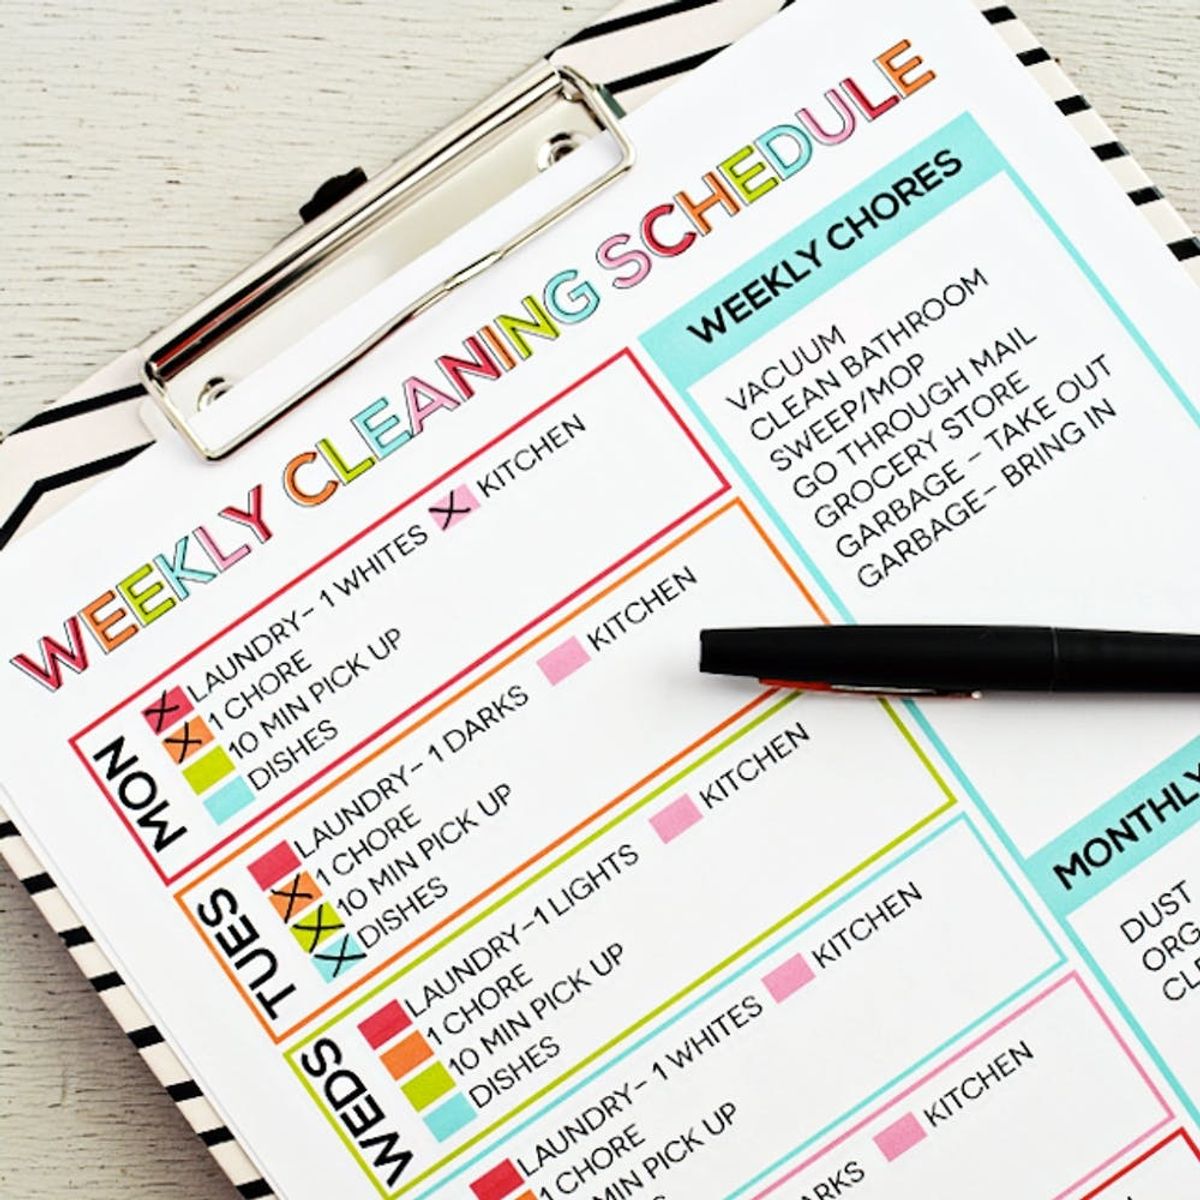 11 Free Printable Checklists to Help You Conquer Spring Cleaning